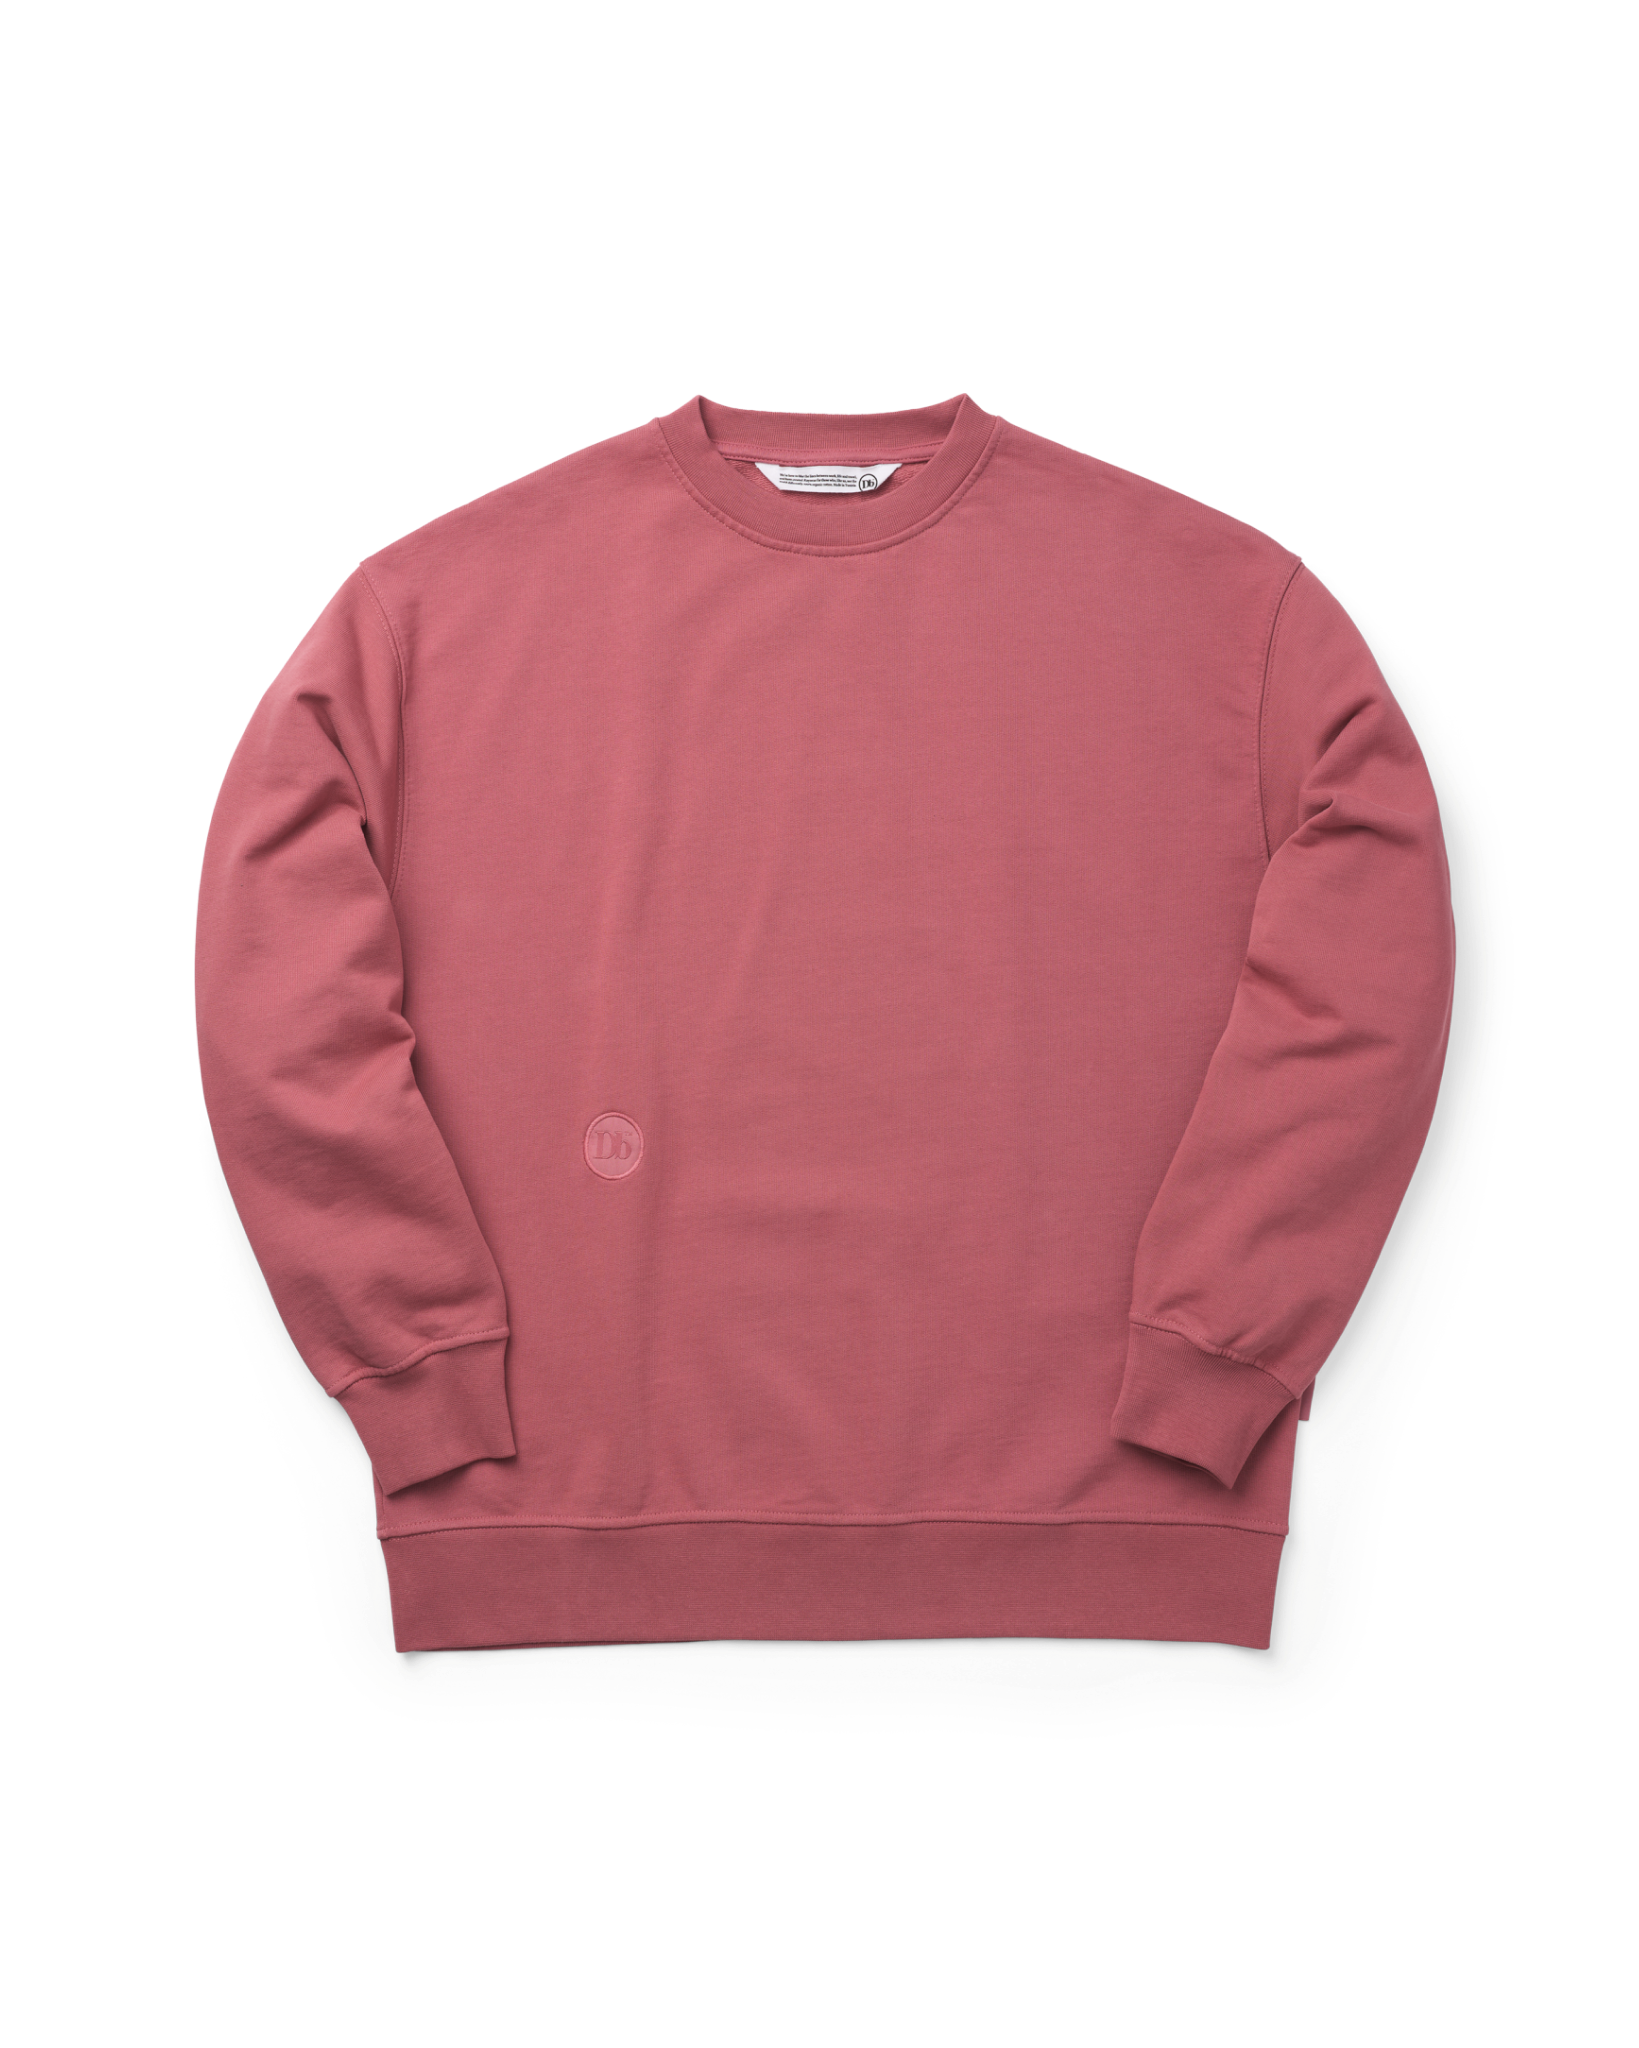 Anywear Crewneck Sunbleached Red - M / Sunbleached Red